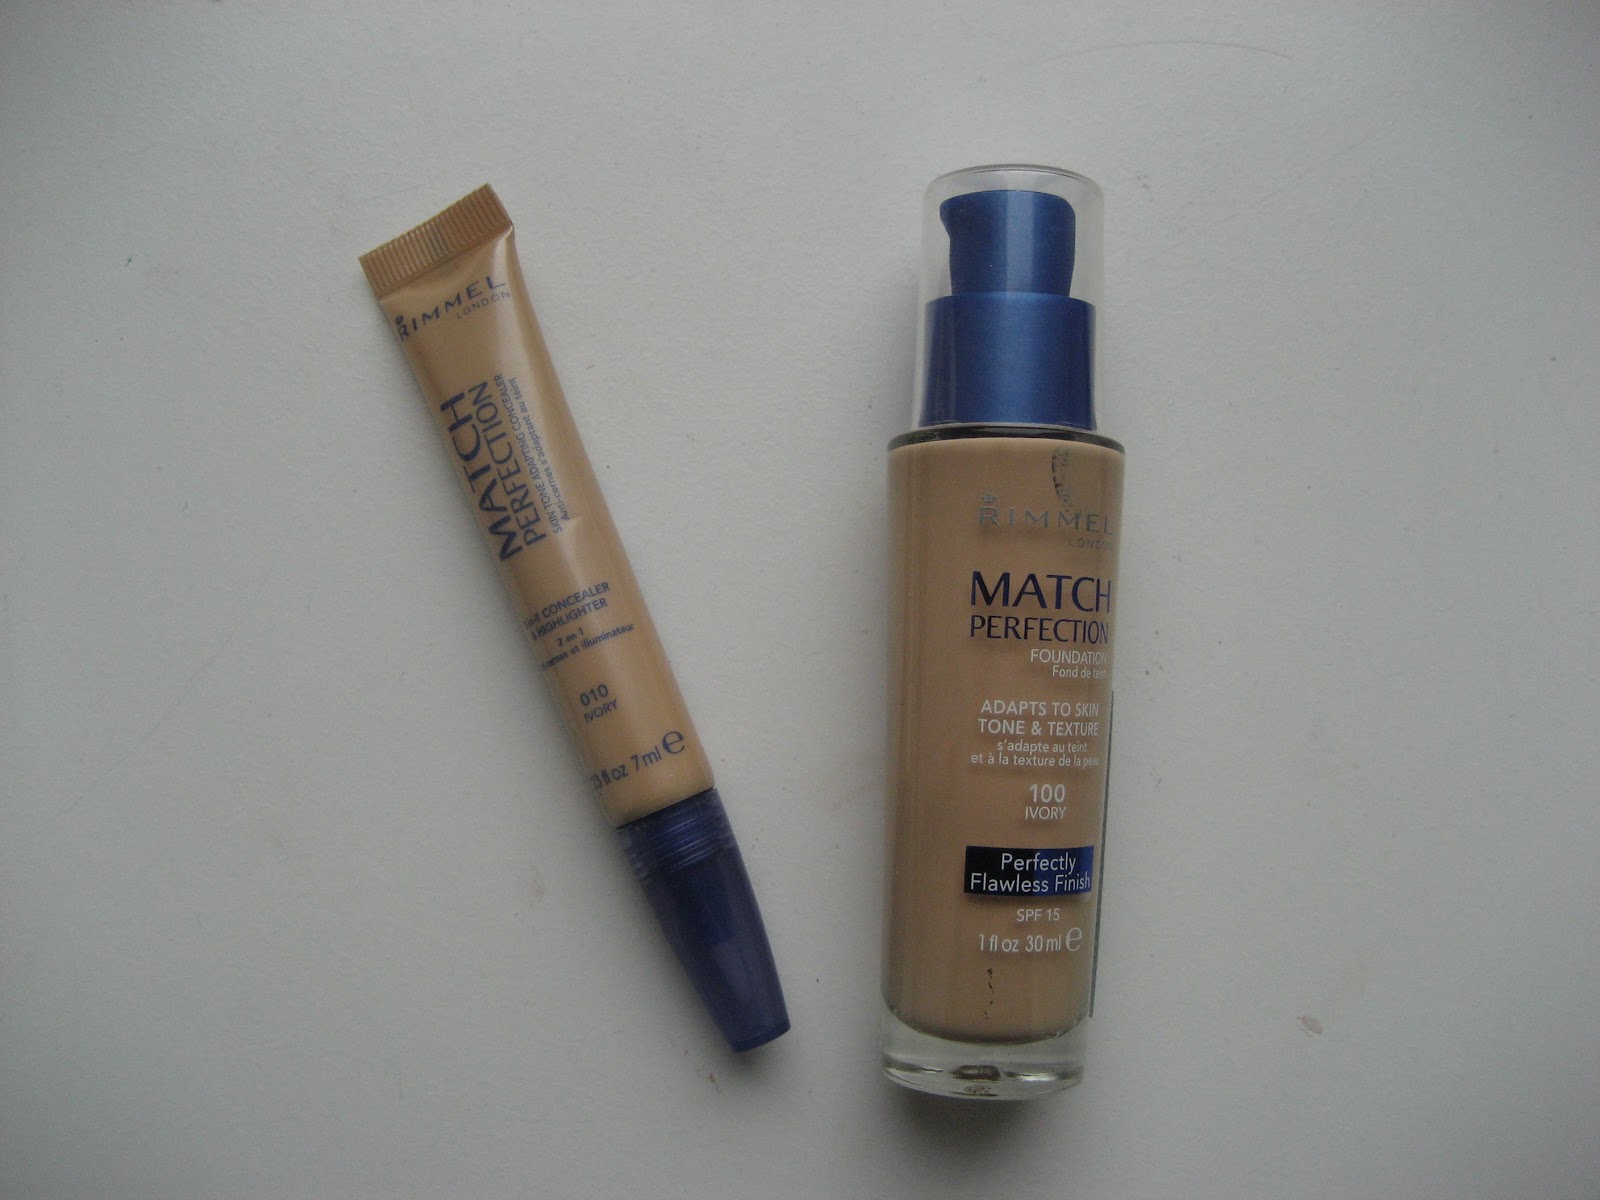 delicate hummingbird.: foundation overview #9: Rimmel Match Perfection & concealer